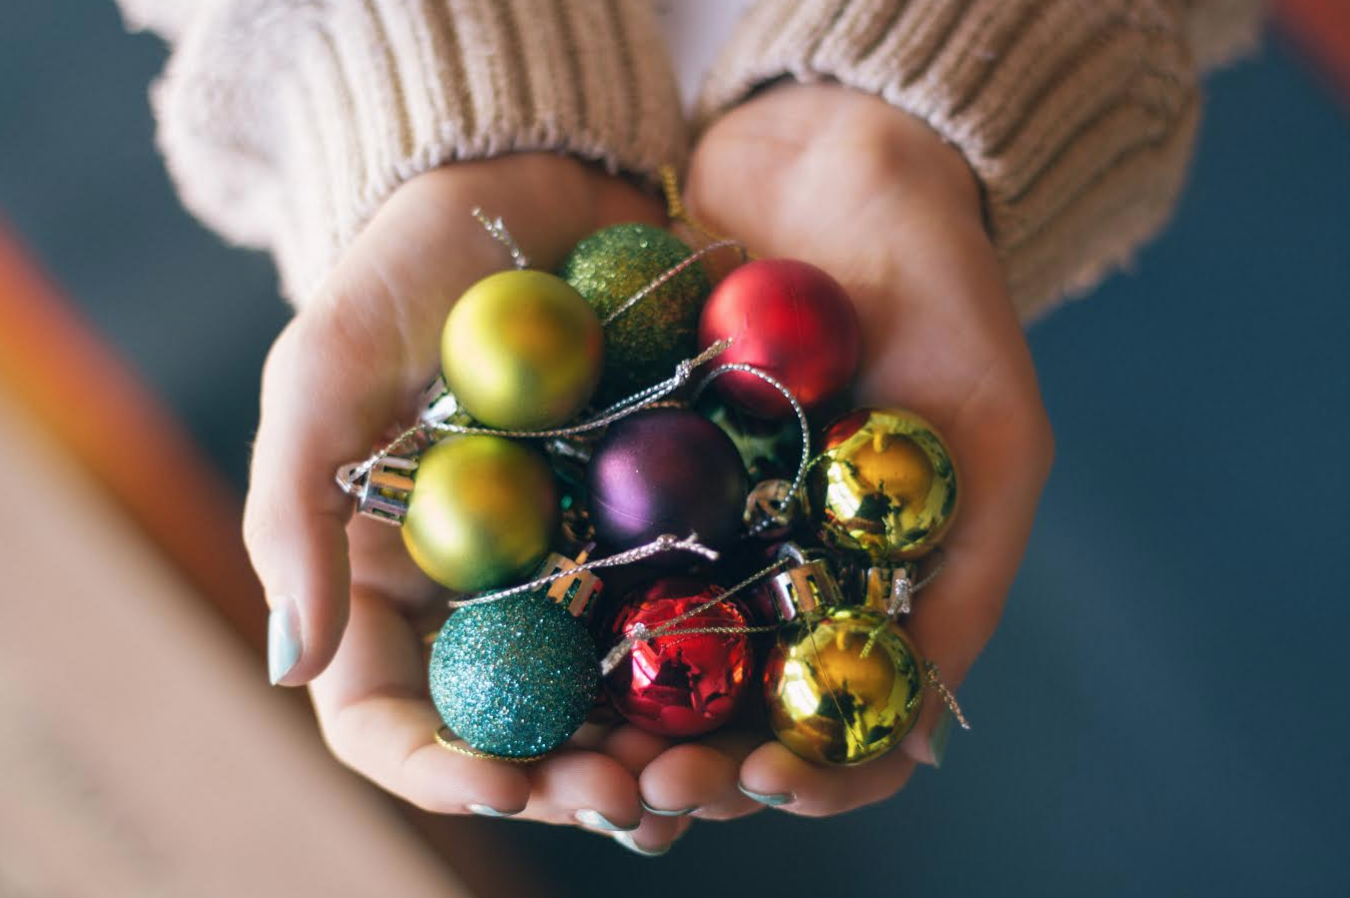 50 festive stock images to download for free | Creative Bloq